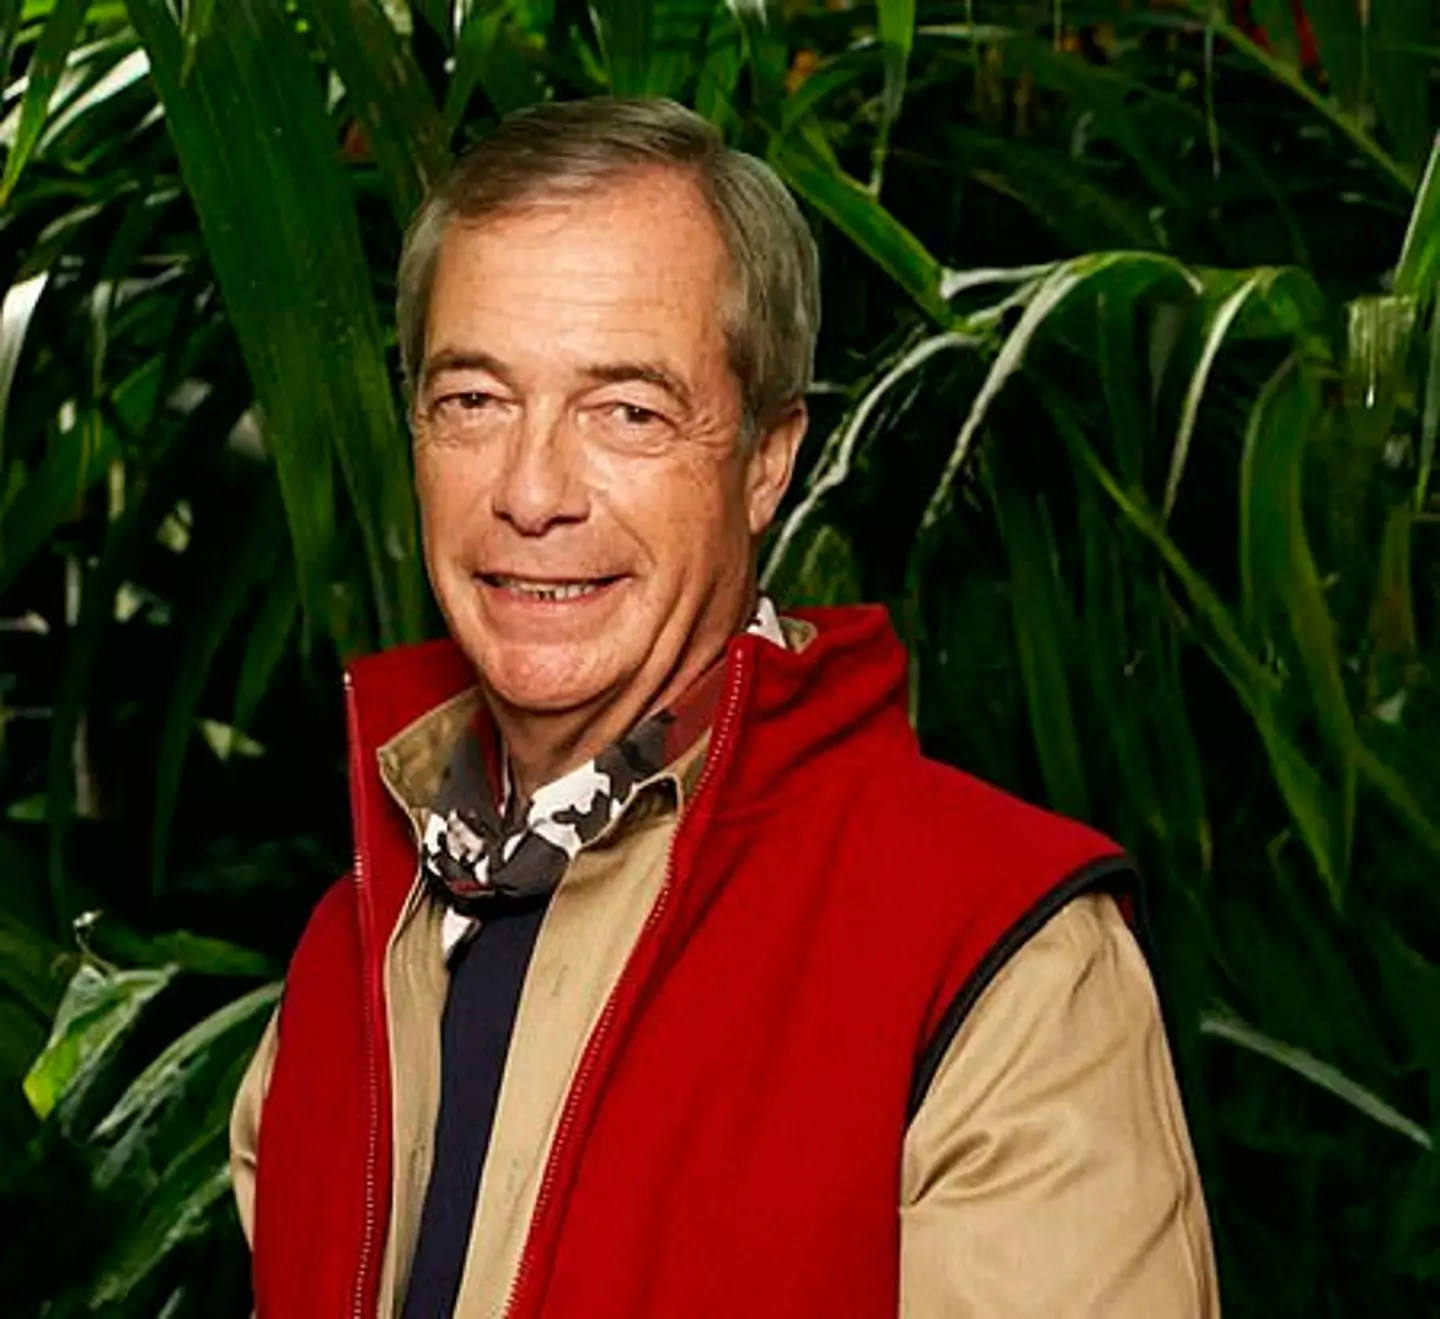 Nigel Farage will be exempt from some of the Bushtucker trials on I'm A Celebrity... Get Me Out Of Here!.